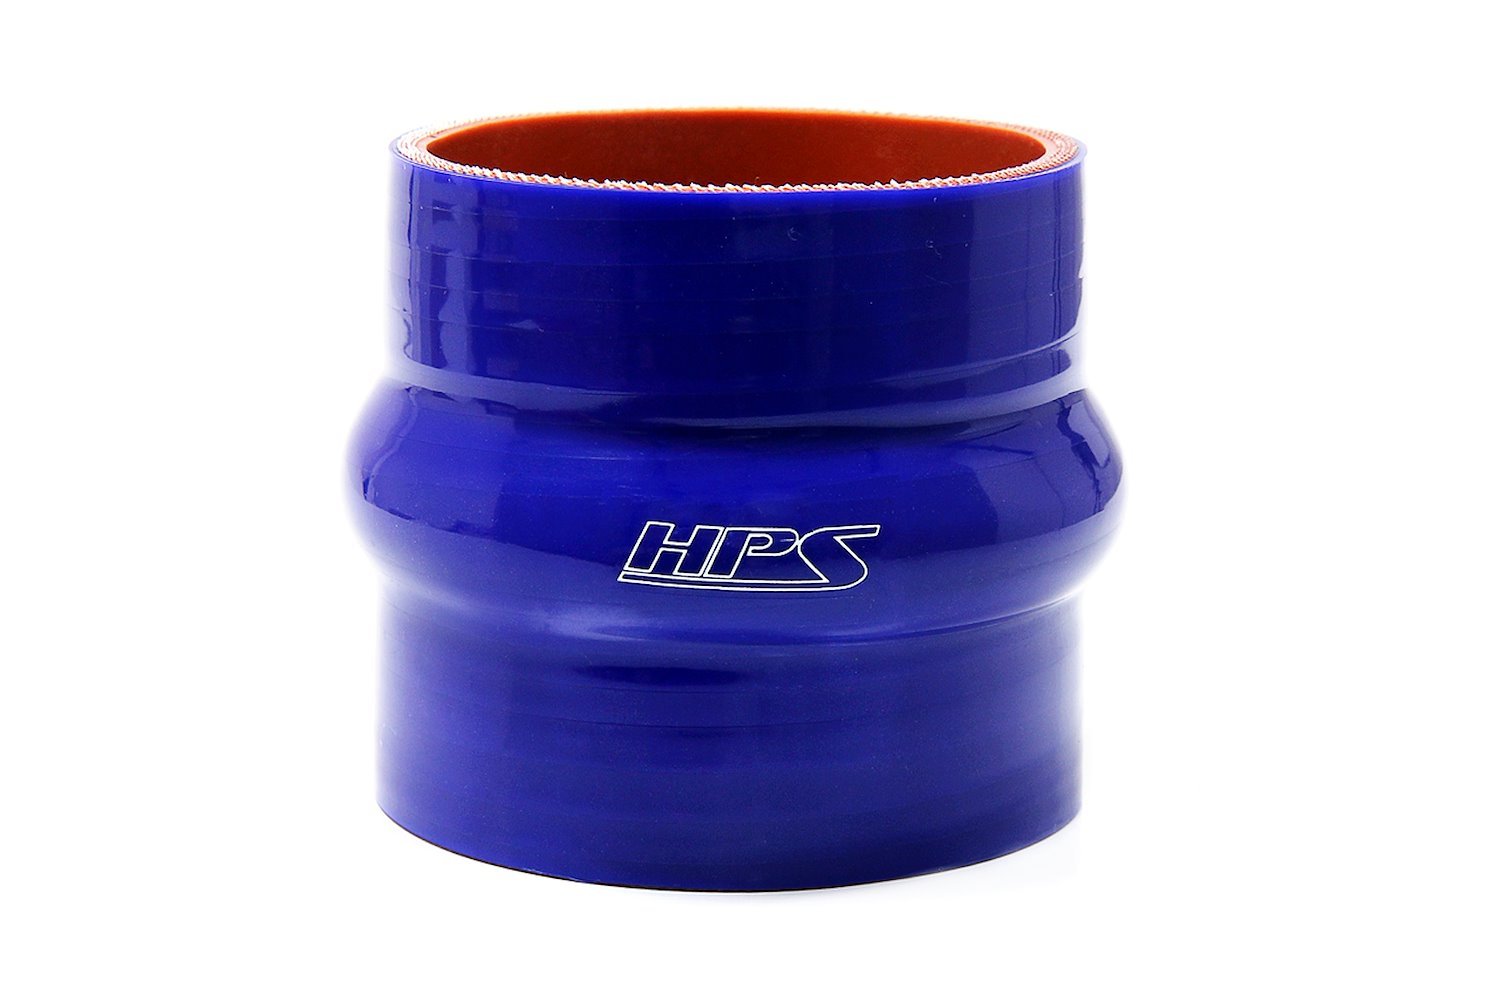 HTSHC-150-L6-BLUE Silicone Hump Coupler Hose, High-Temp 4-Ply Reinforced, 1-1/2 in. ID, 6 in. Long, Blue